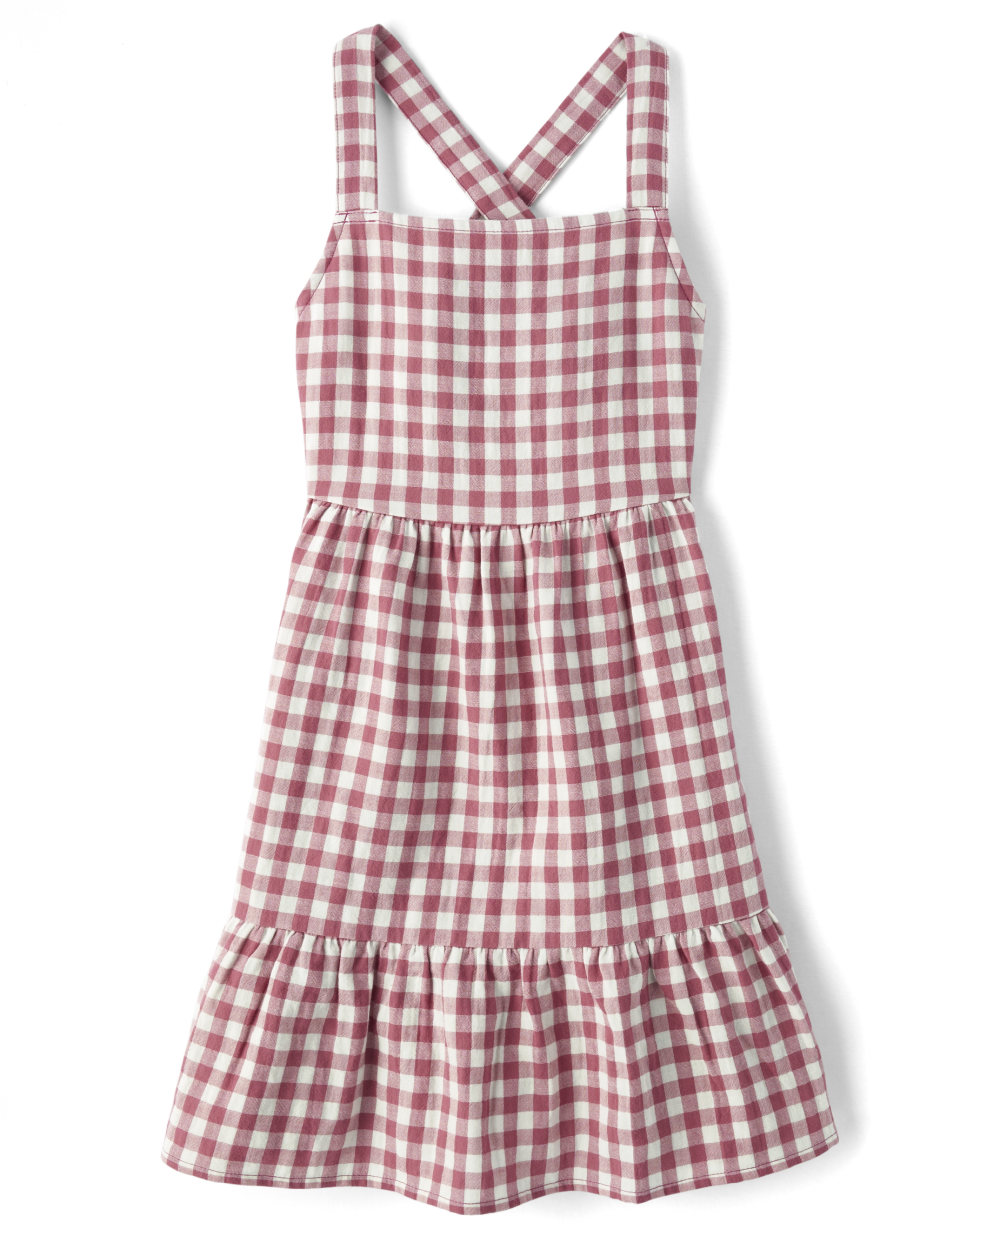 Girls Square Neck Checkered Gingham Print Above the Knee Sleeveless Dress With Ruffles